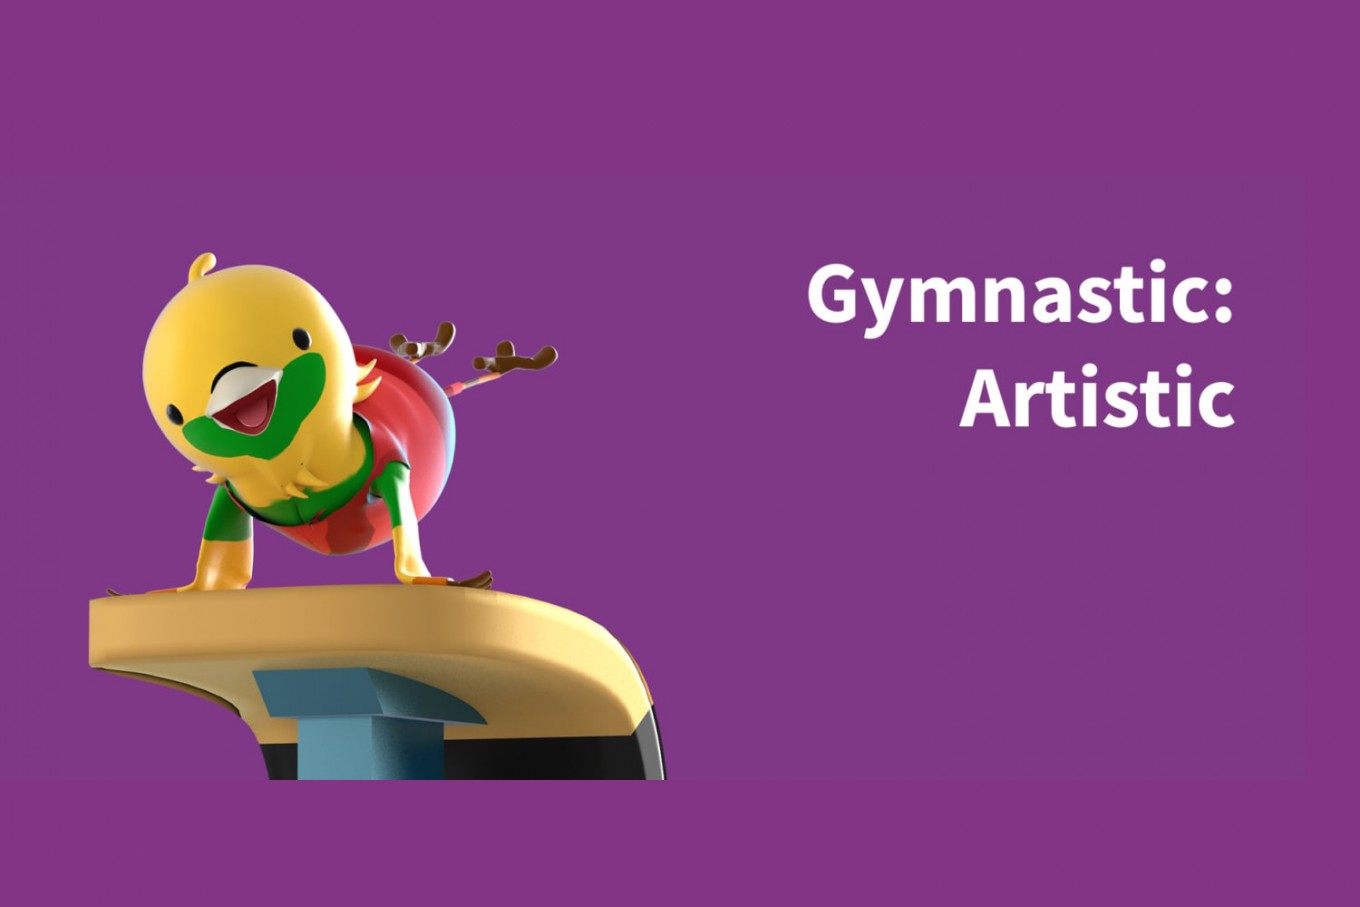 Asian Games China tops artistic gymnastics category Sports The